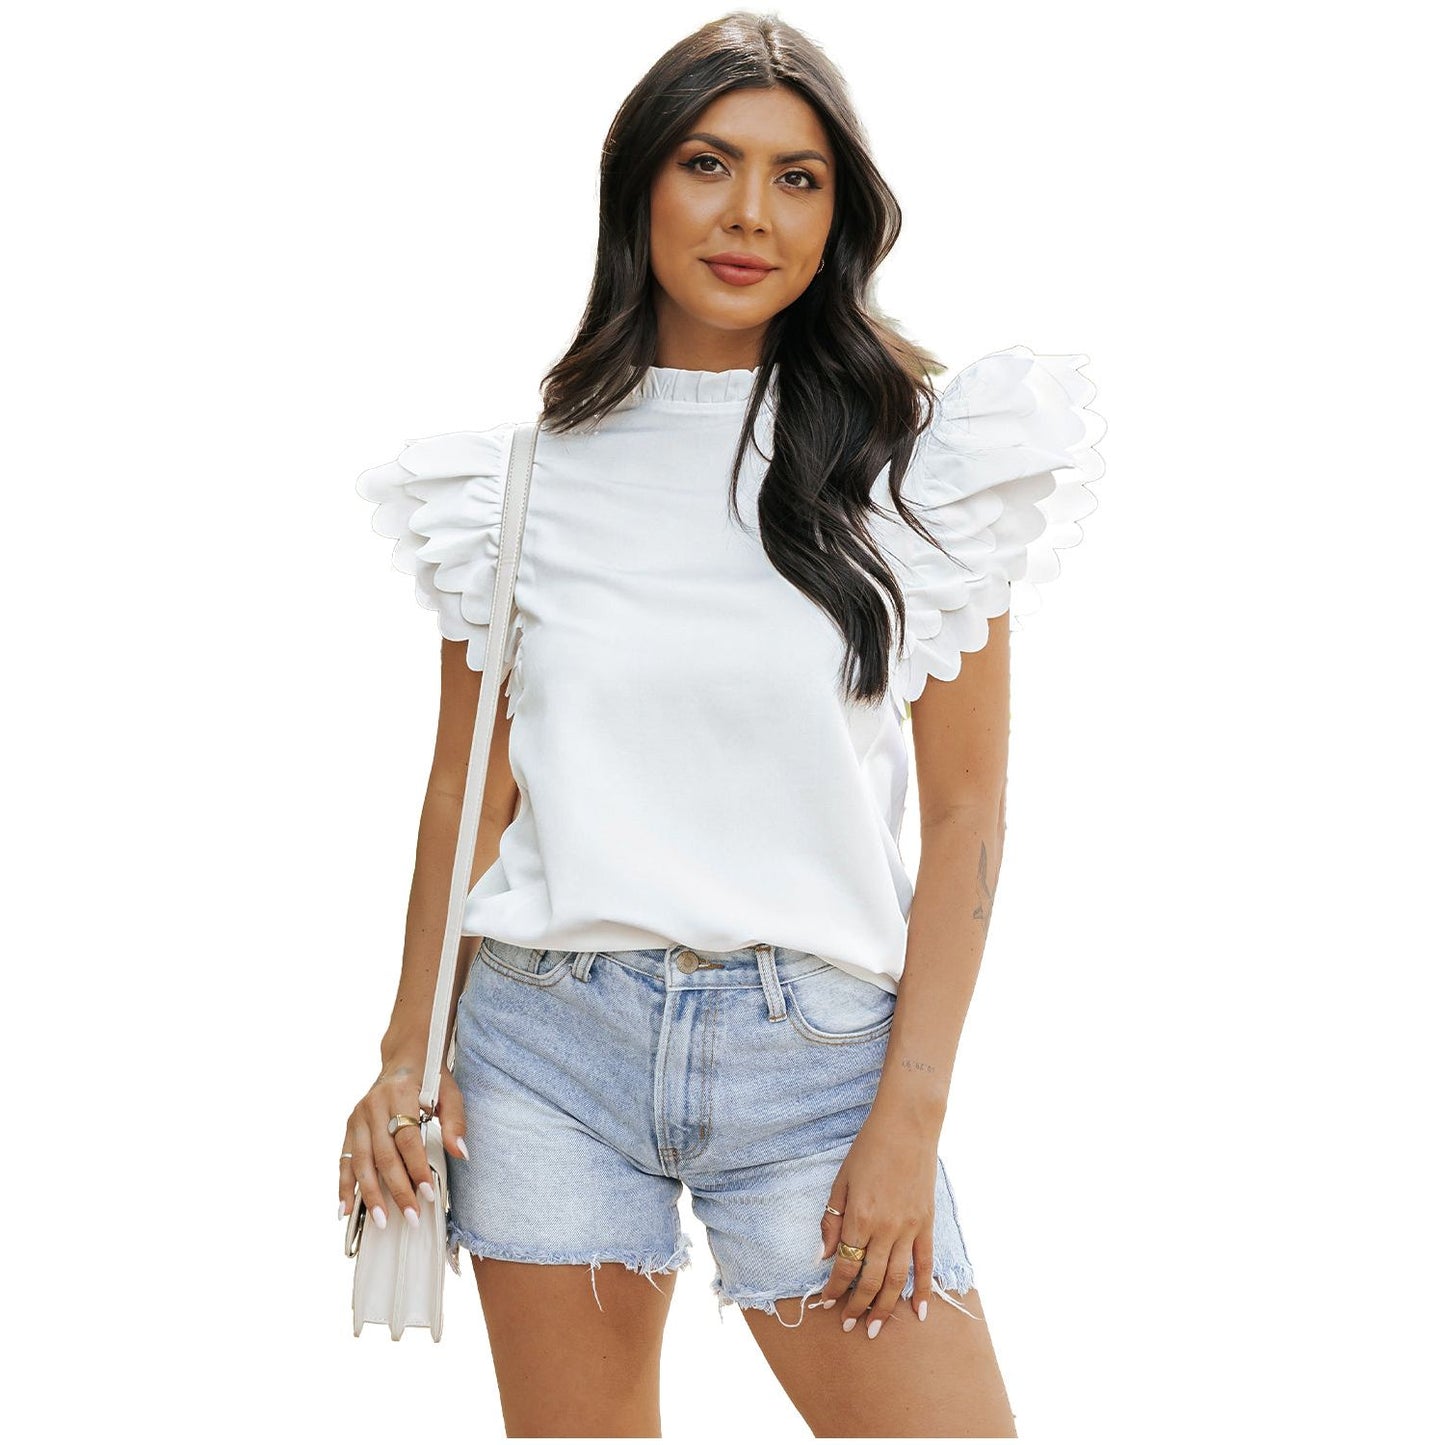 In the Clouds White Scalloped Ruffle Sleeve Top